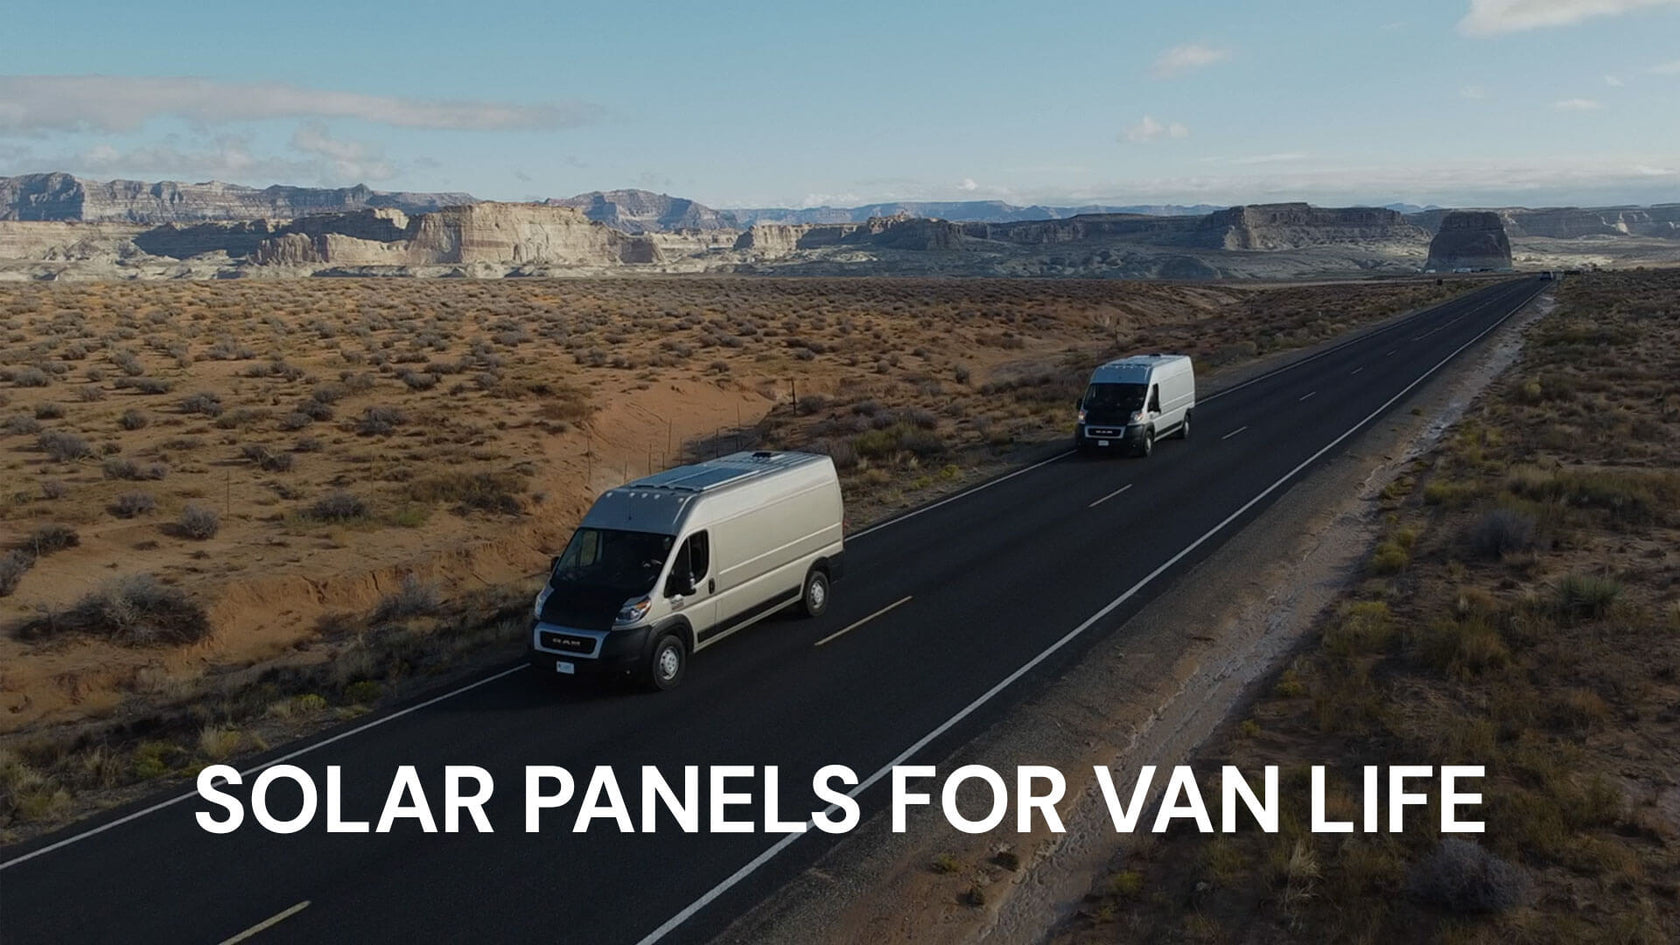 Solar Panels for Van Life by Rich Solar, ideal for mobile and off-grid living, ensuring power on the go